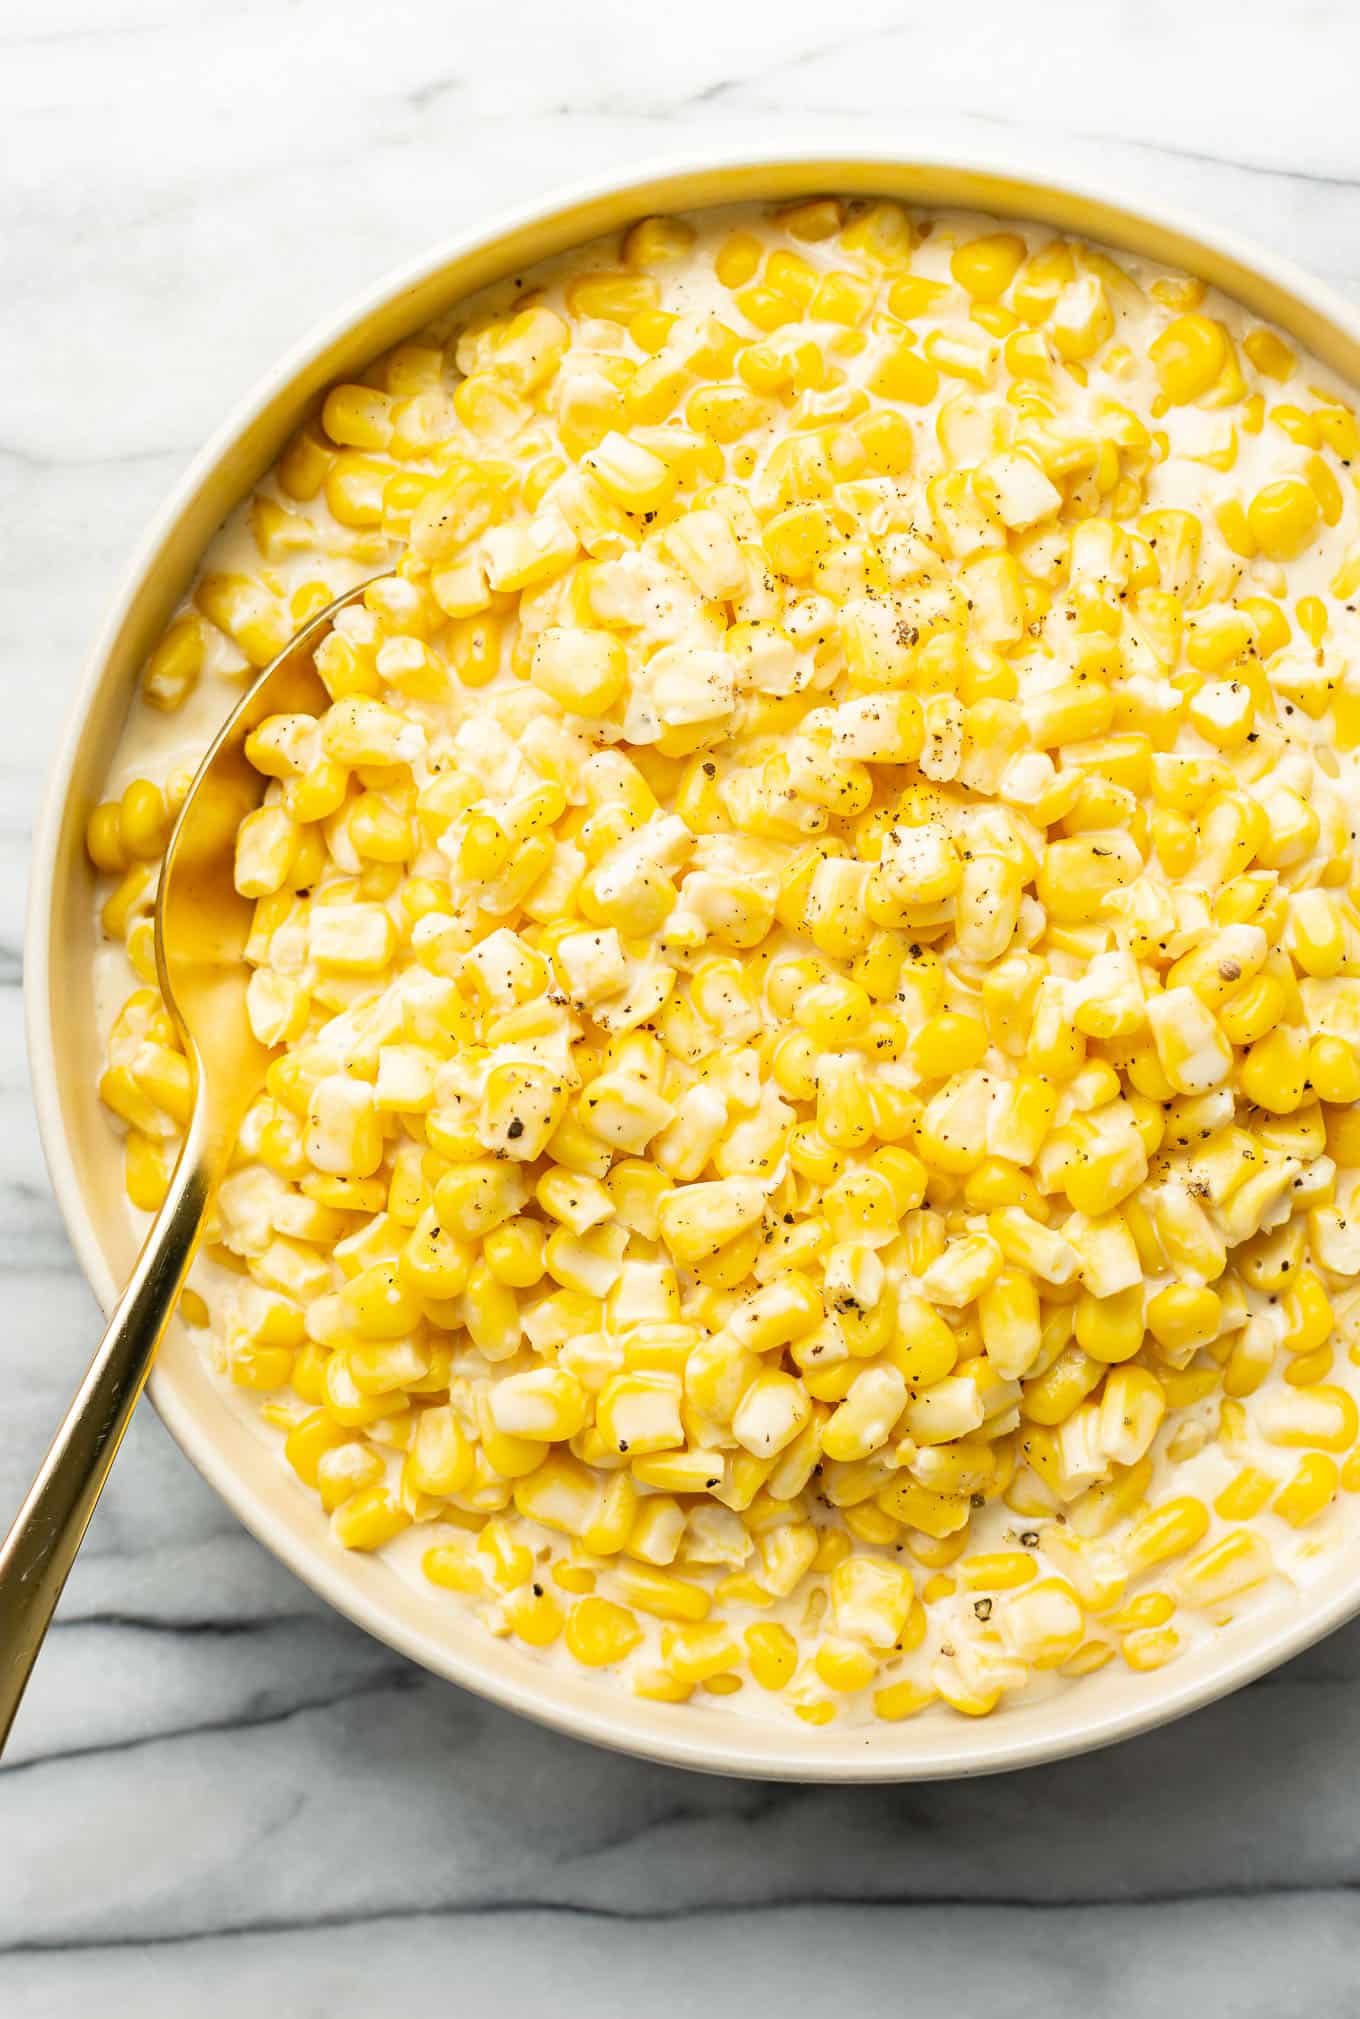 How to Make Frozen Corn - Dish 'n' the Kitchen